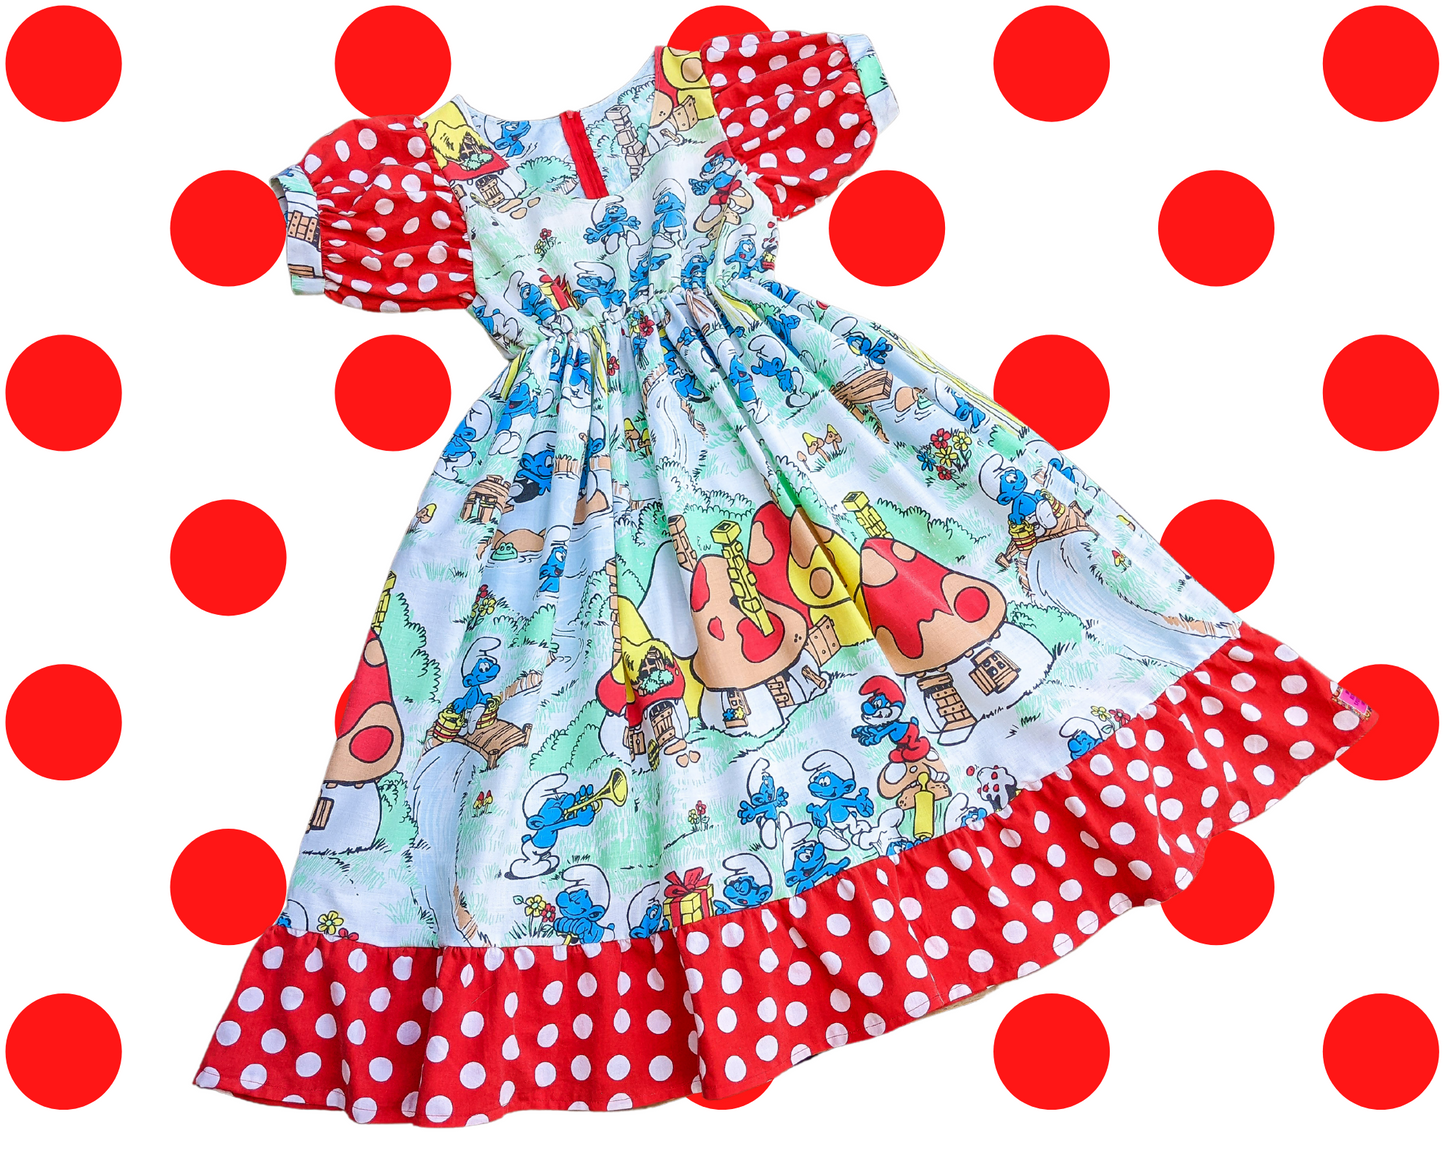 Handmade, Upcycled The Smurfs Bedsheet Dress with Red and White Polka Dot Fabric, Short Puffy Sleeves Size S/M